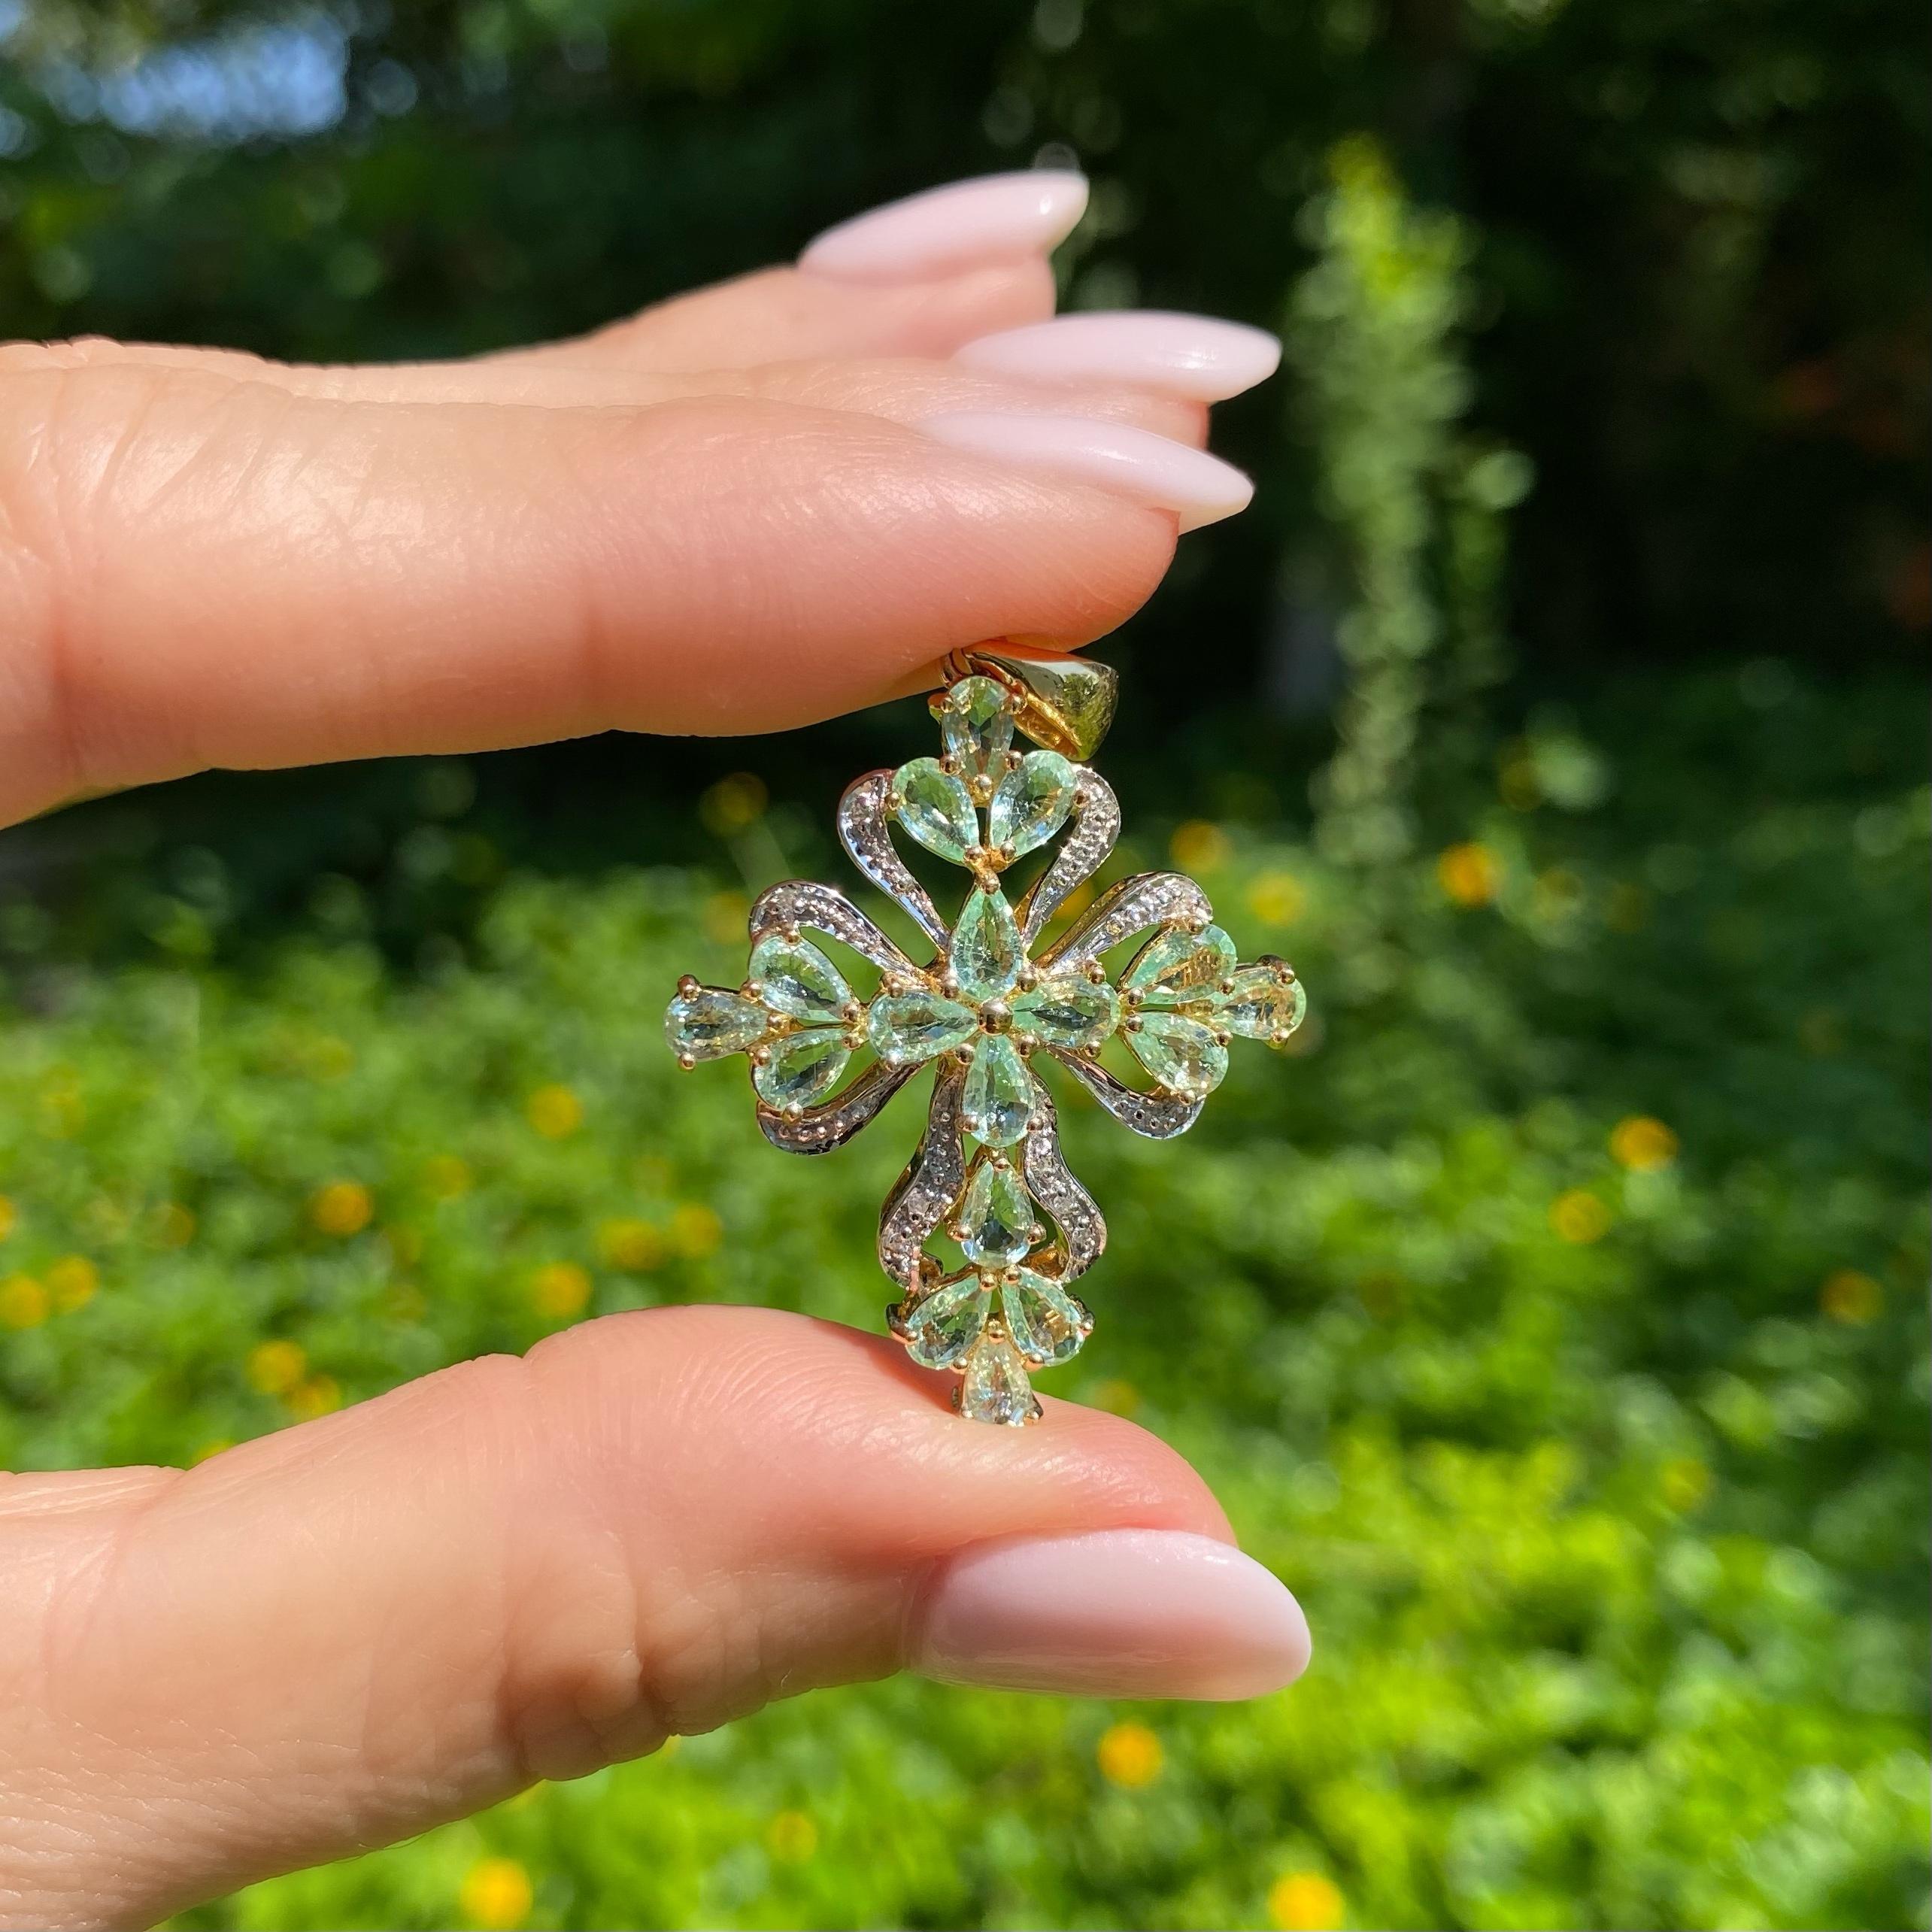 Simply Beautiful! Paraiba Tourmaline and Diamond Gold Cross Pendant, Artistically Hand crafted and set with Teardrop Paraiba Tourmaline, weighing approx. 2.86tcw, and Diamonds, approx. 0.03 total Carats. Dimensions: 1.70”l x 1.15”w x 0.29”h. Finely